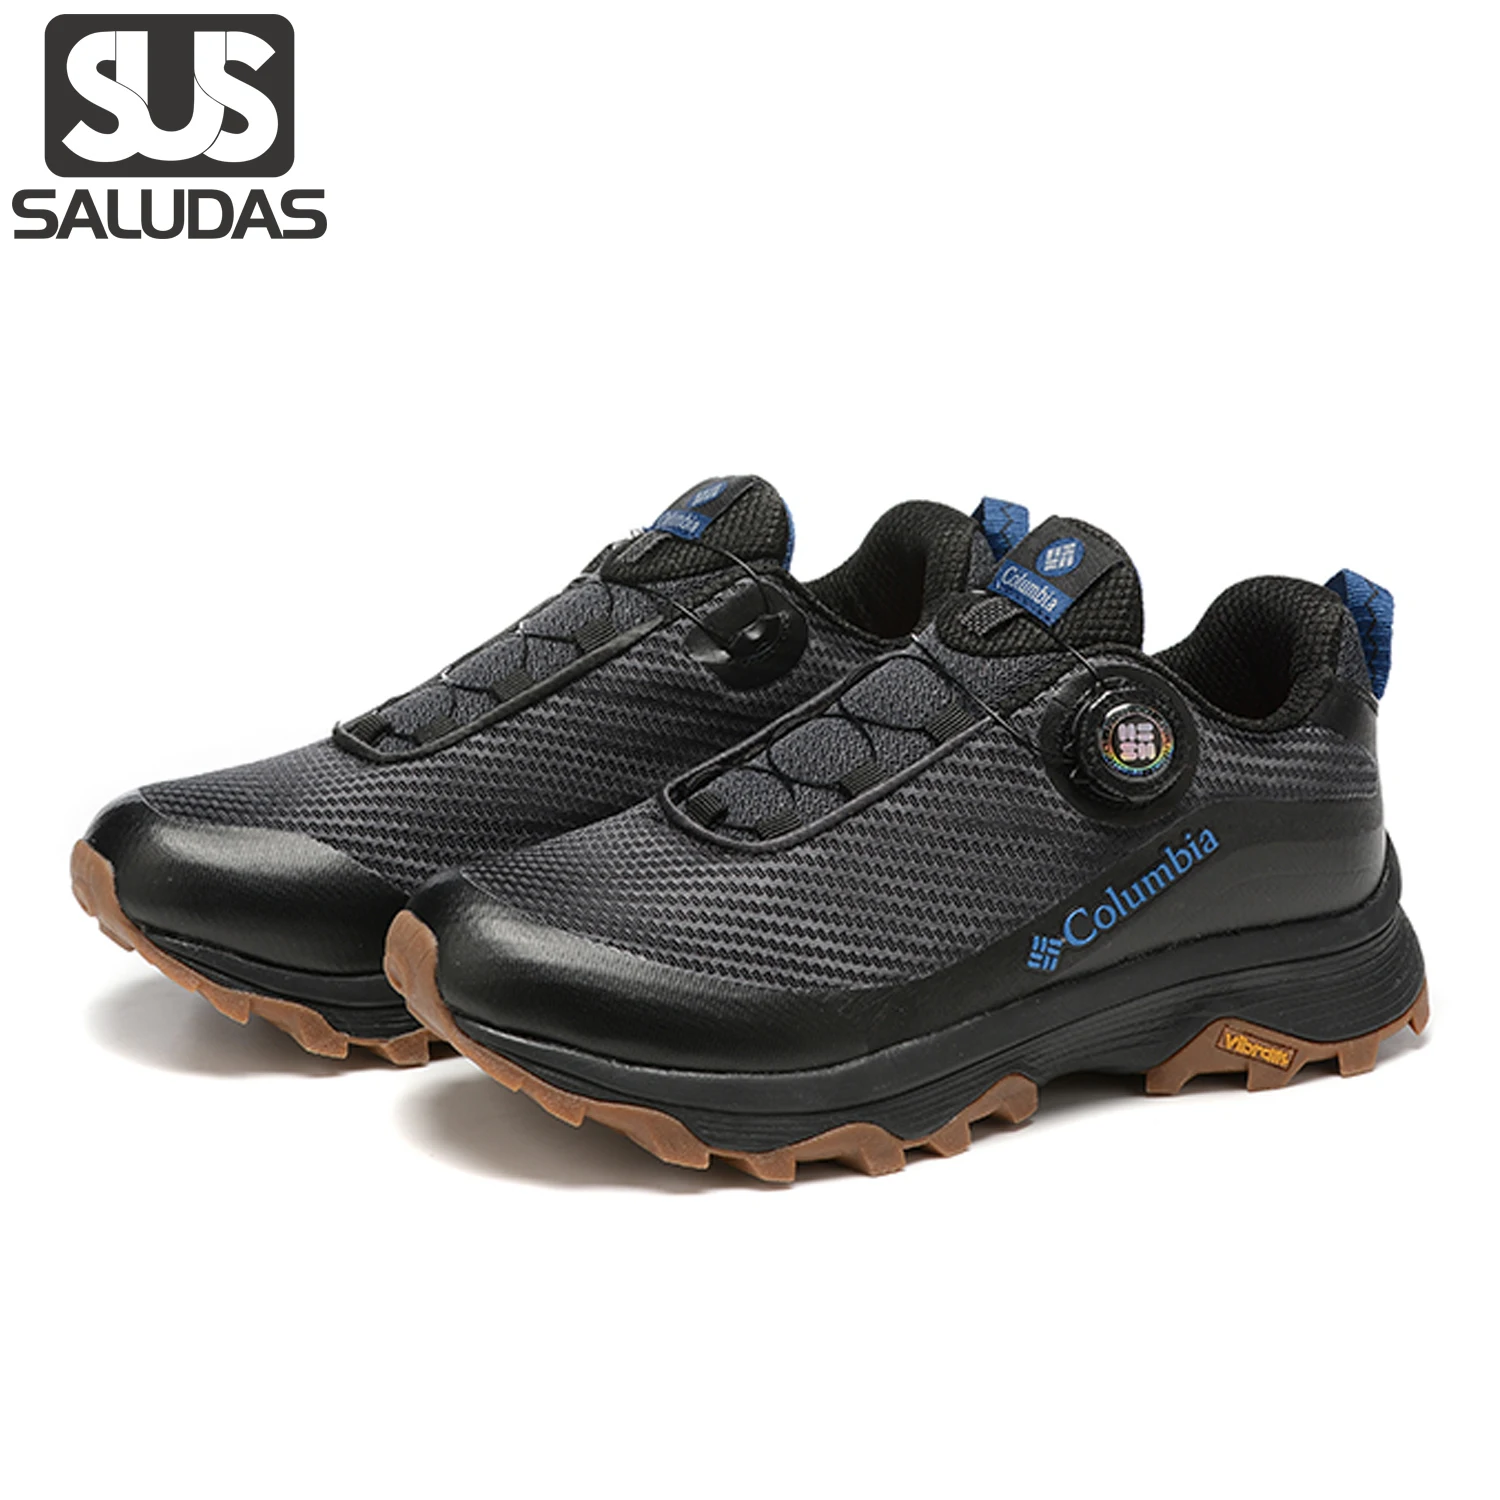 

SALUDAS Trekking Shoes Men Outdoor Boa System Hiking Shoes Anti-Slip Breathable Knob Outdoor Jungle Camping Adventure Sneakers